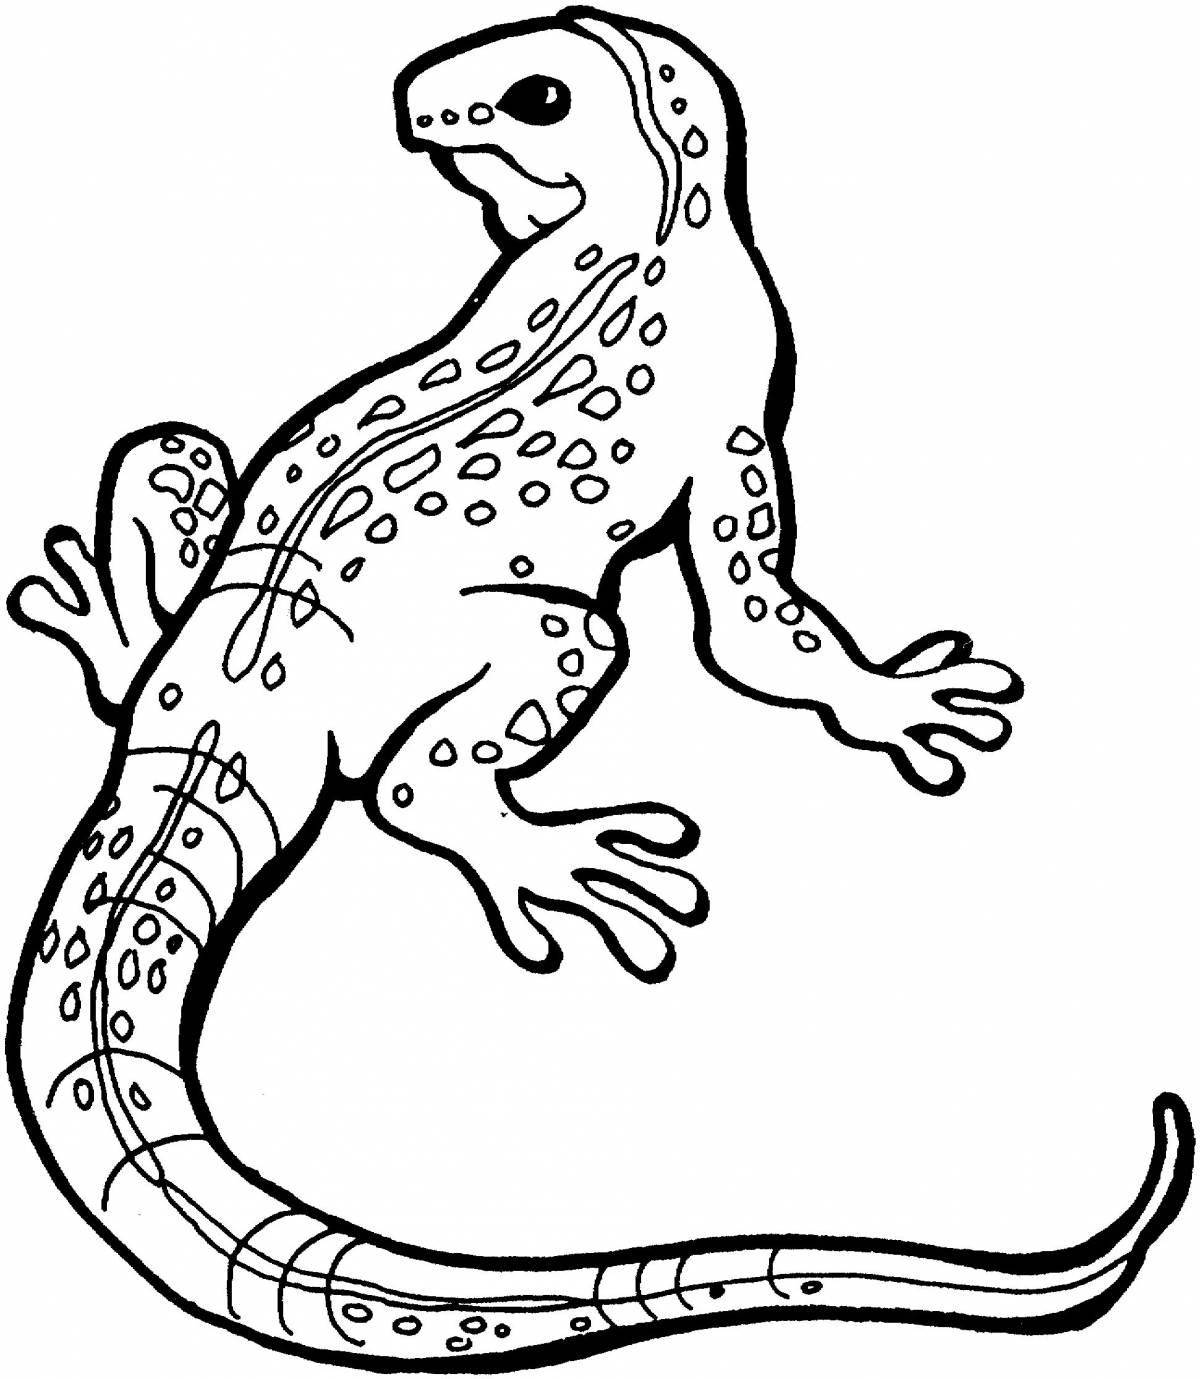 Awesome lizard coloring page